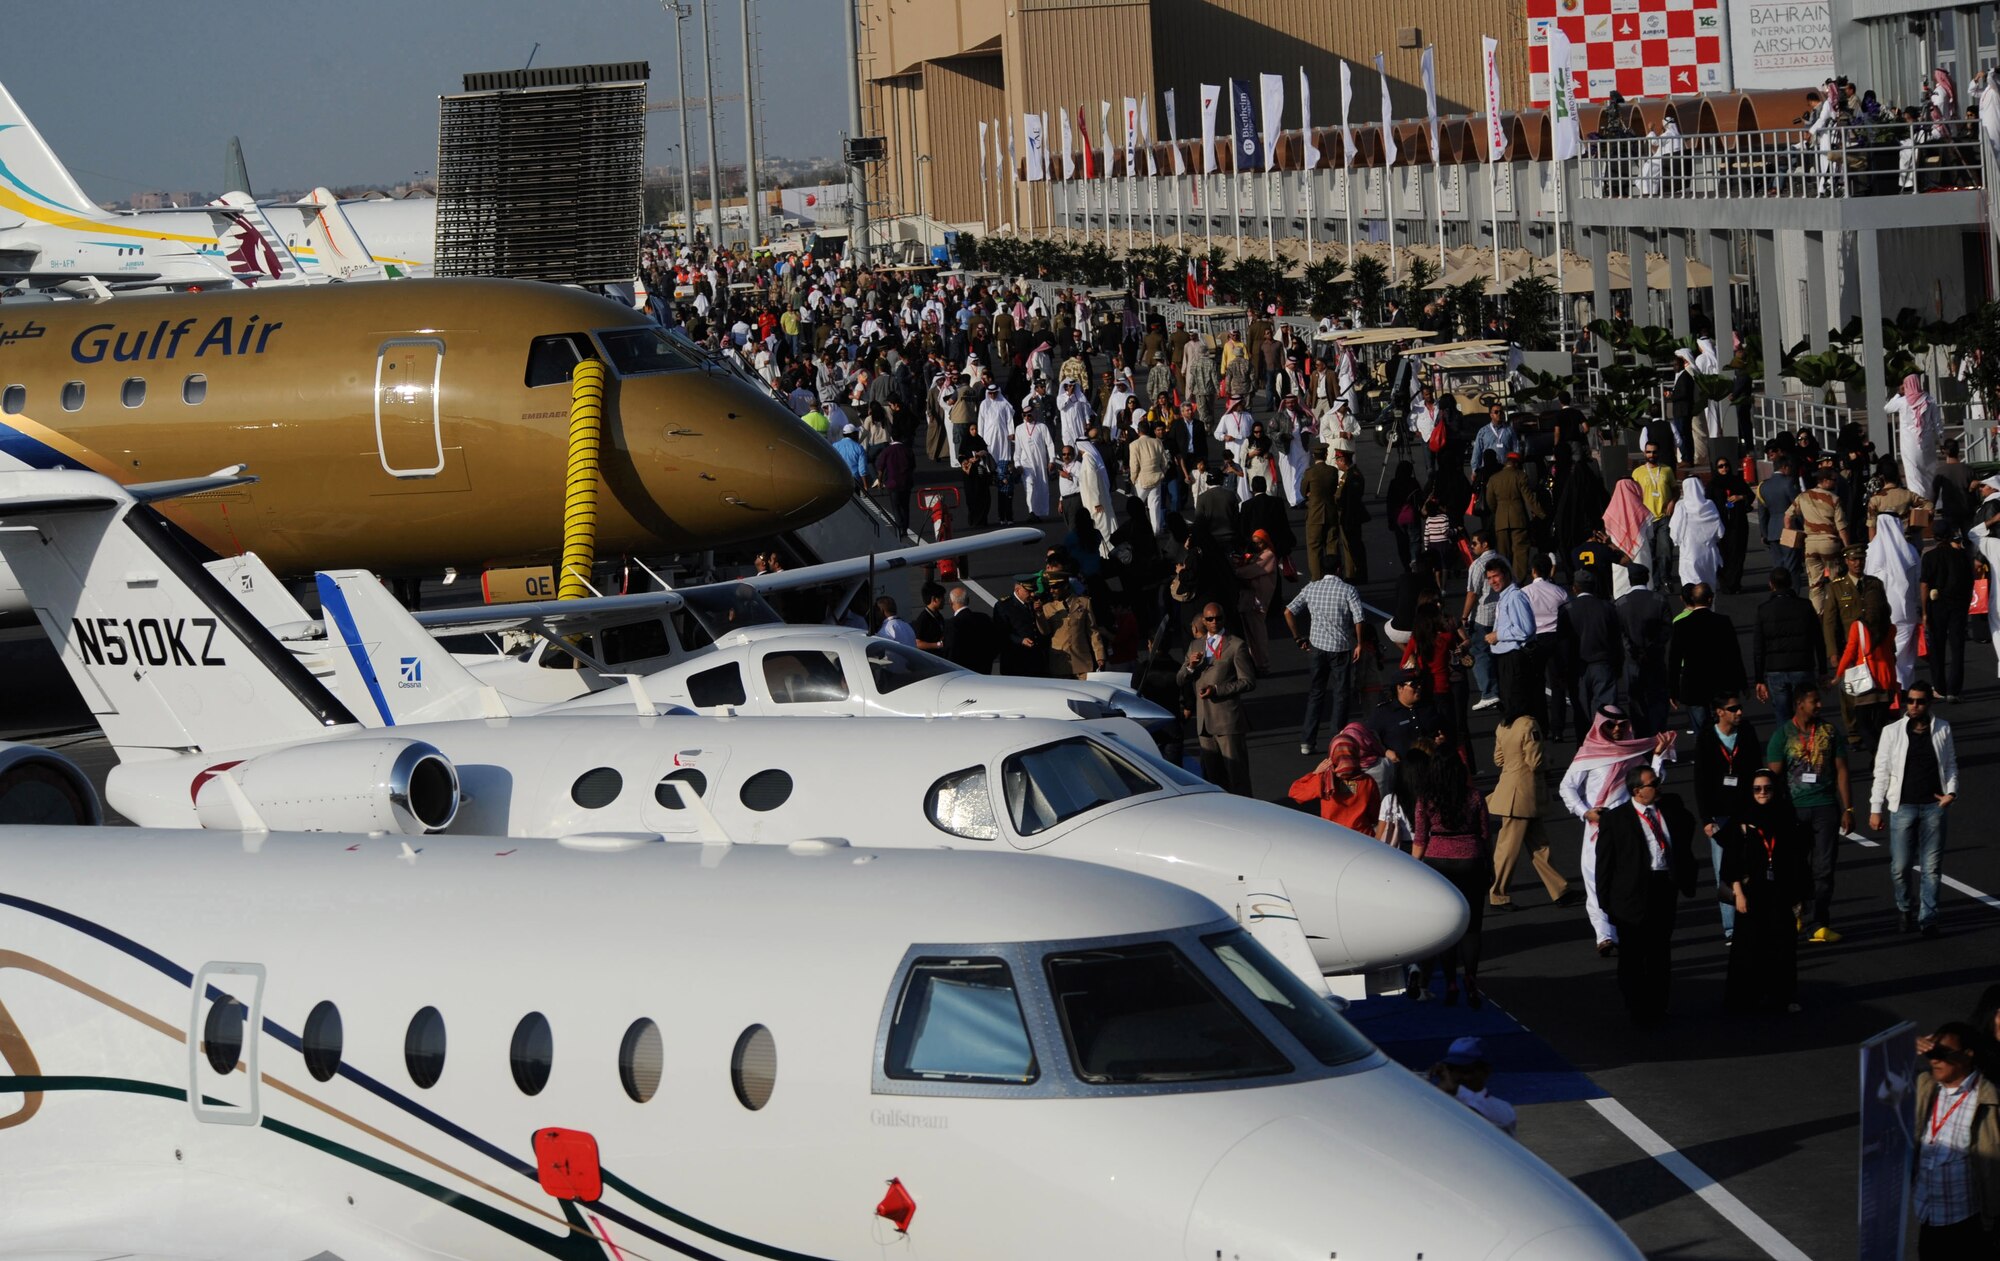 Spectators from Bahrain and other Middle Eastern countries walk past aircraft during Bahrain's inaugural airshow, Jan. 23, 2010.   (U.S. Air Force photo/ Staff Sgt. Angelita Lawrence/released)

